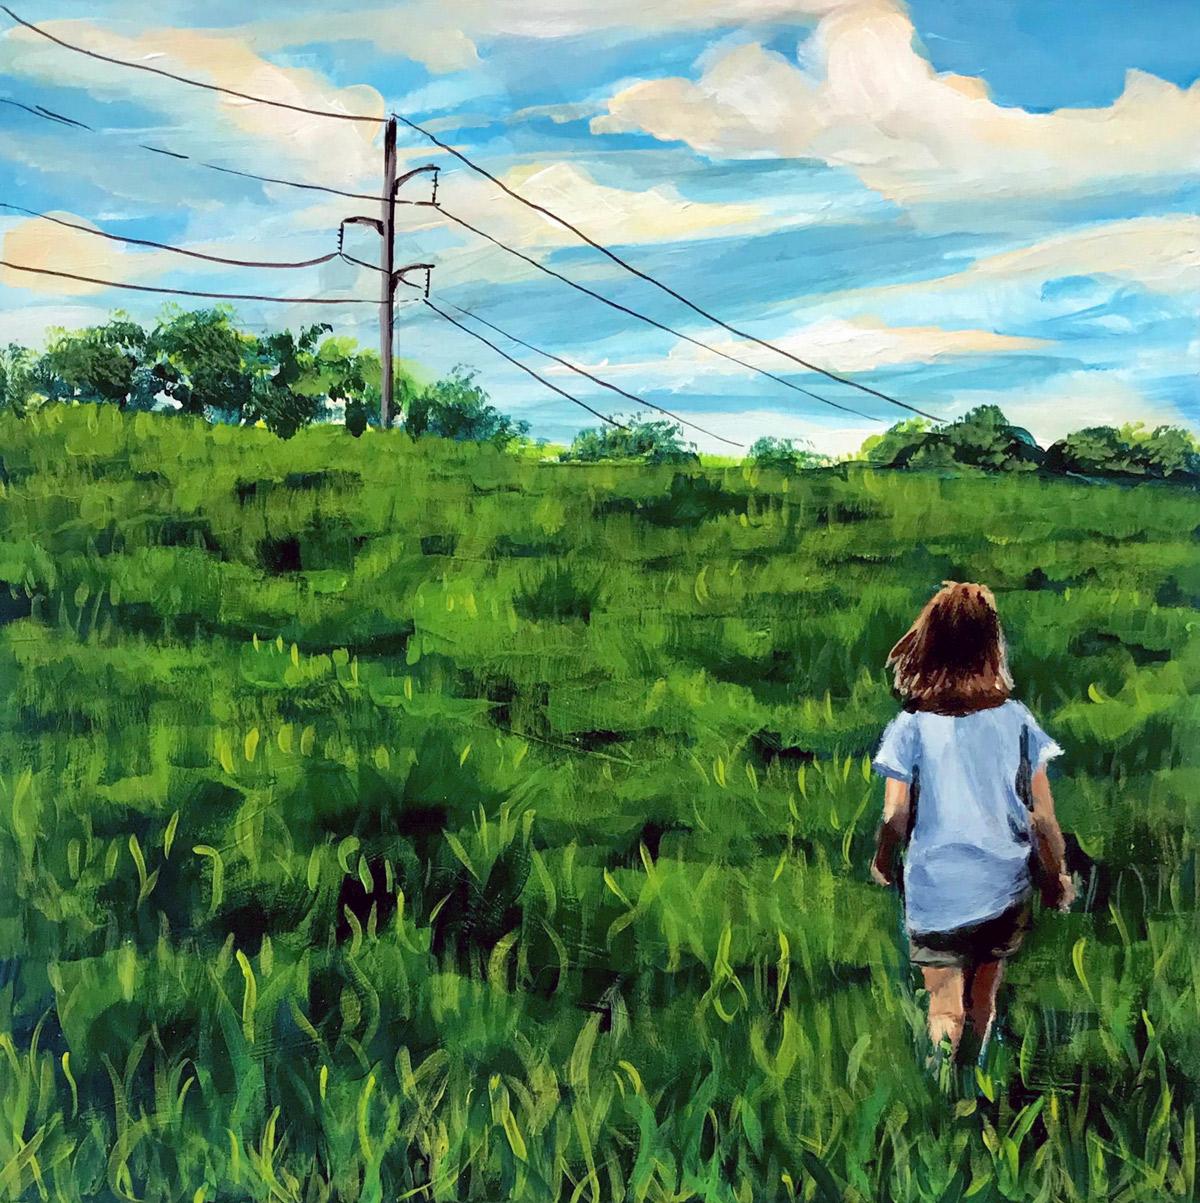 Painting of young girls walking in green field